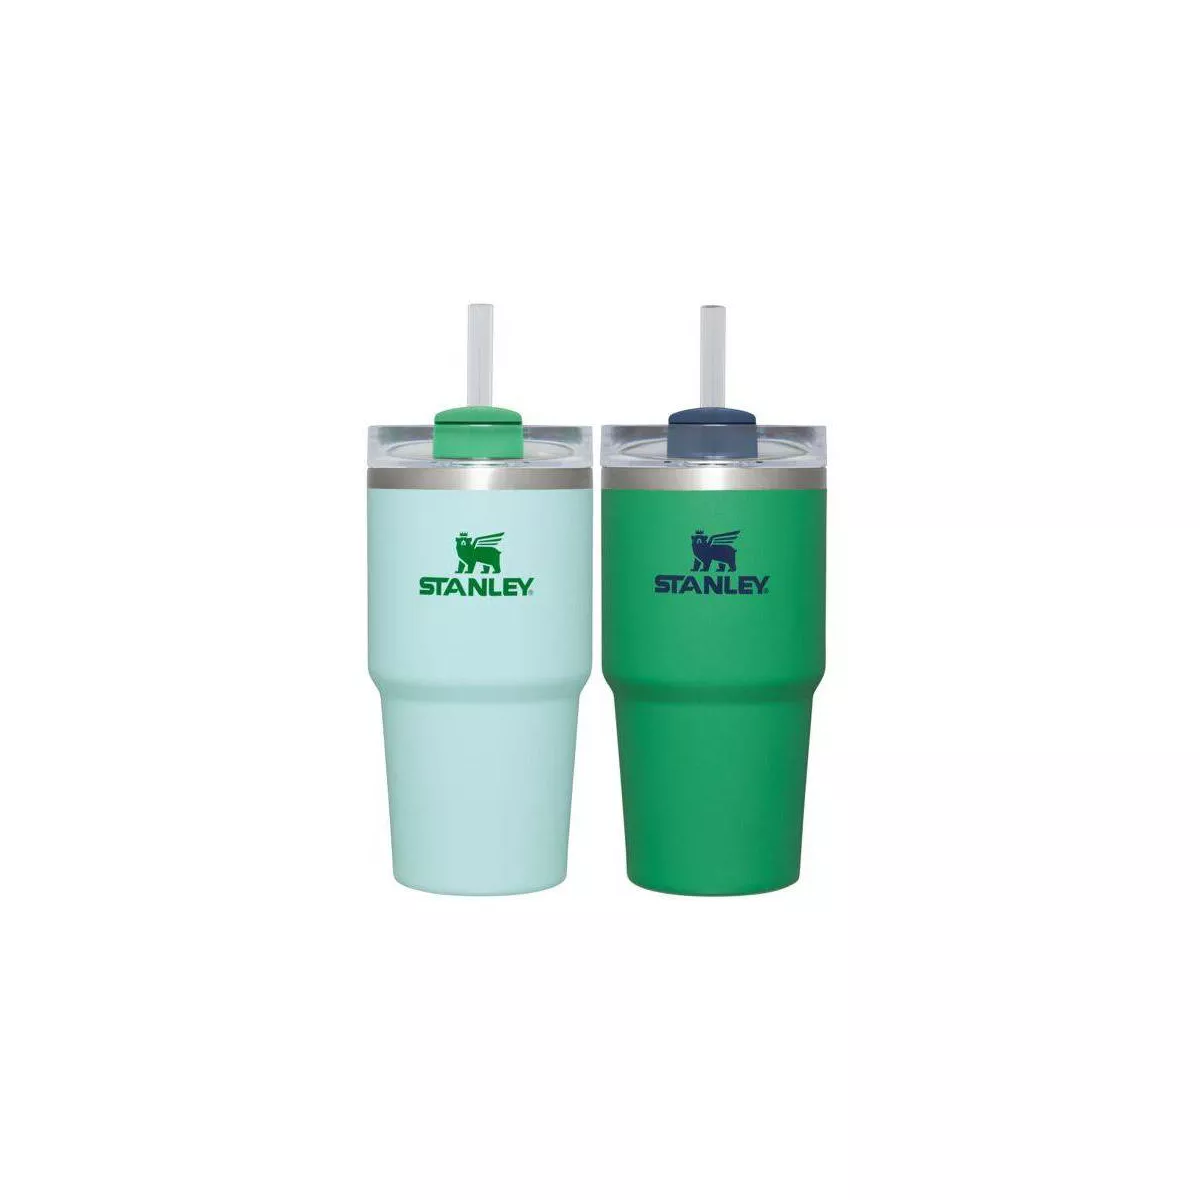 Stanley 2pk 20oz Stainless Steel H2.0 Flowstate Quencher Tumblers Kelly  Green & Watercolor Blue 